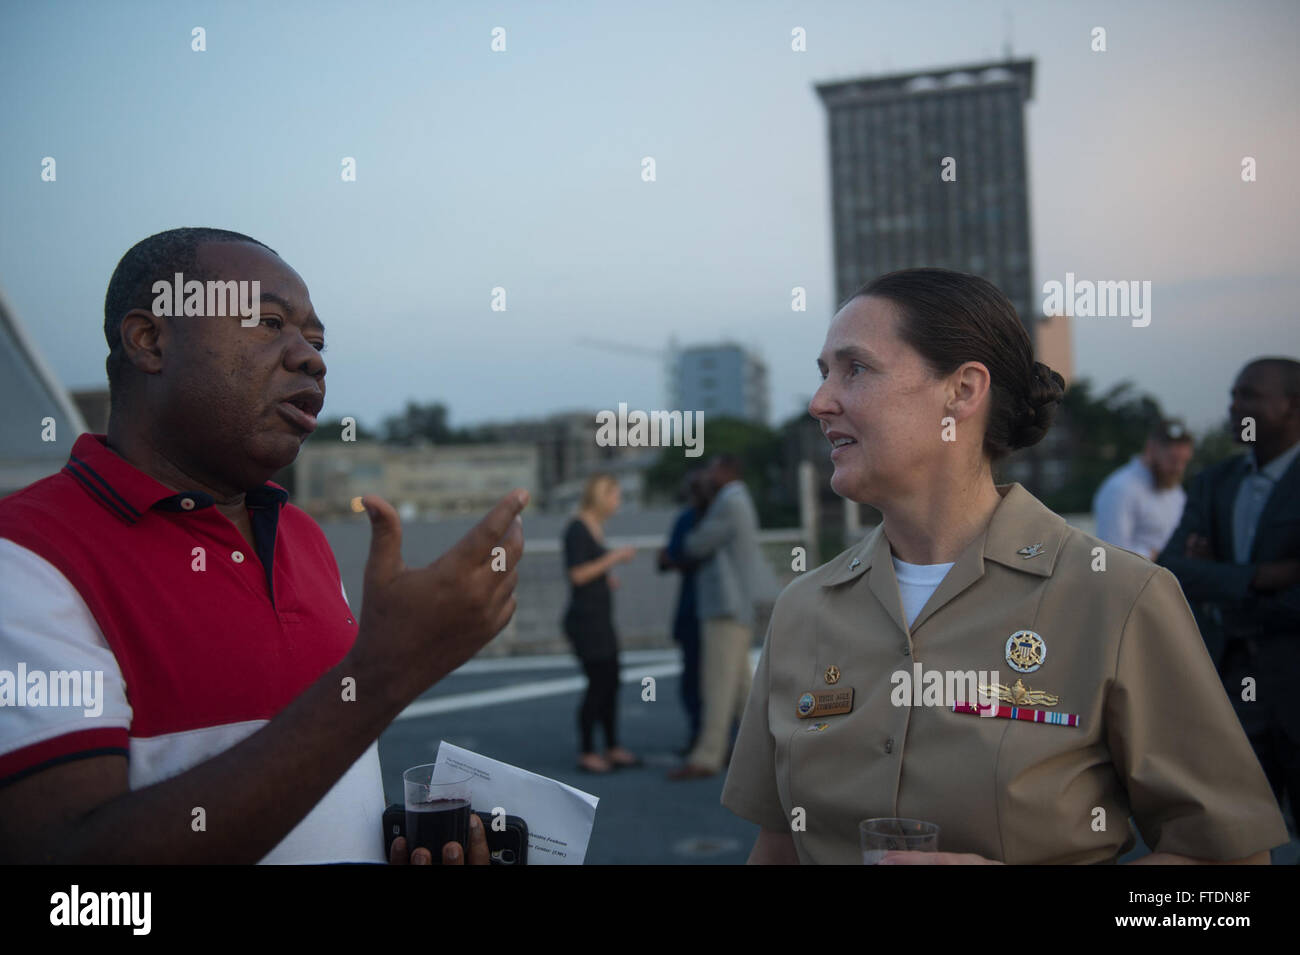 160312-N-WV703-021  DOUALA, Cameroon (March 12, 2016) - Multinational Center of Coordination Chief, Mbah Sylvester Fonkoua (left) speaks with Capt. Heidi Agle, commodore, Military Sealift Command Europe and Africa aboard USNS Spearhead (T-EPF 1) during African Maritime Law Enforcement Partnership Cameroon closing ceremony March 12, 2016. The Military Sealift Command expeditionary fast transport vessel USNS Spearhead is on a scheduled deployment in the U.S. 6th Fleet area of operations to support the international collaborative capacity-building program Africa Partnership Station. (U.S. Navy ph Stock Photo